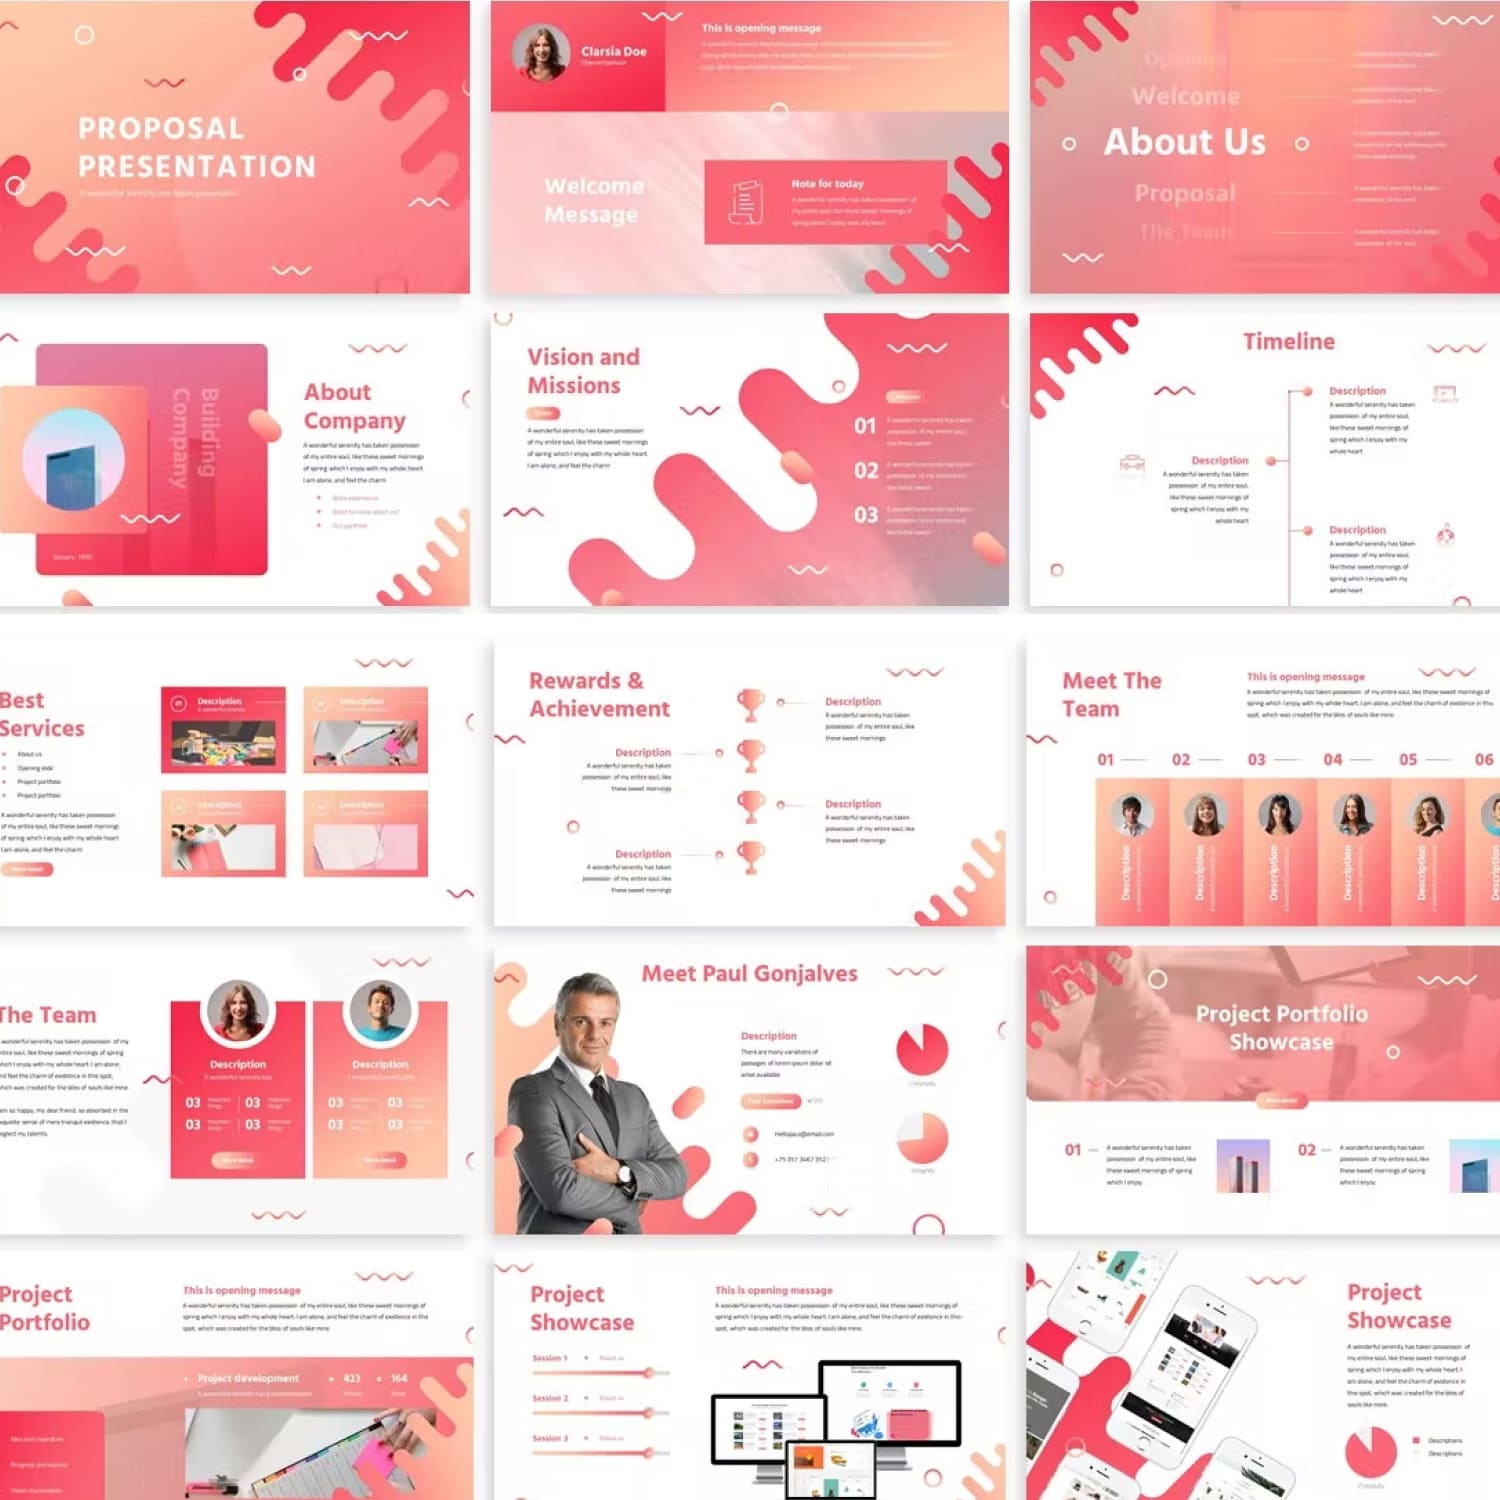 Proposal abstract powerpoint template from SlideFactory.